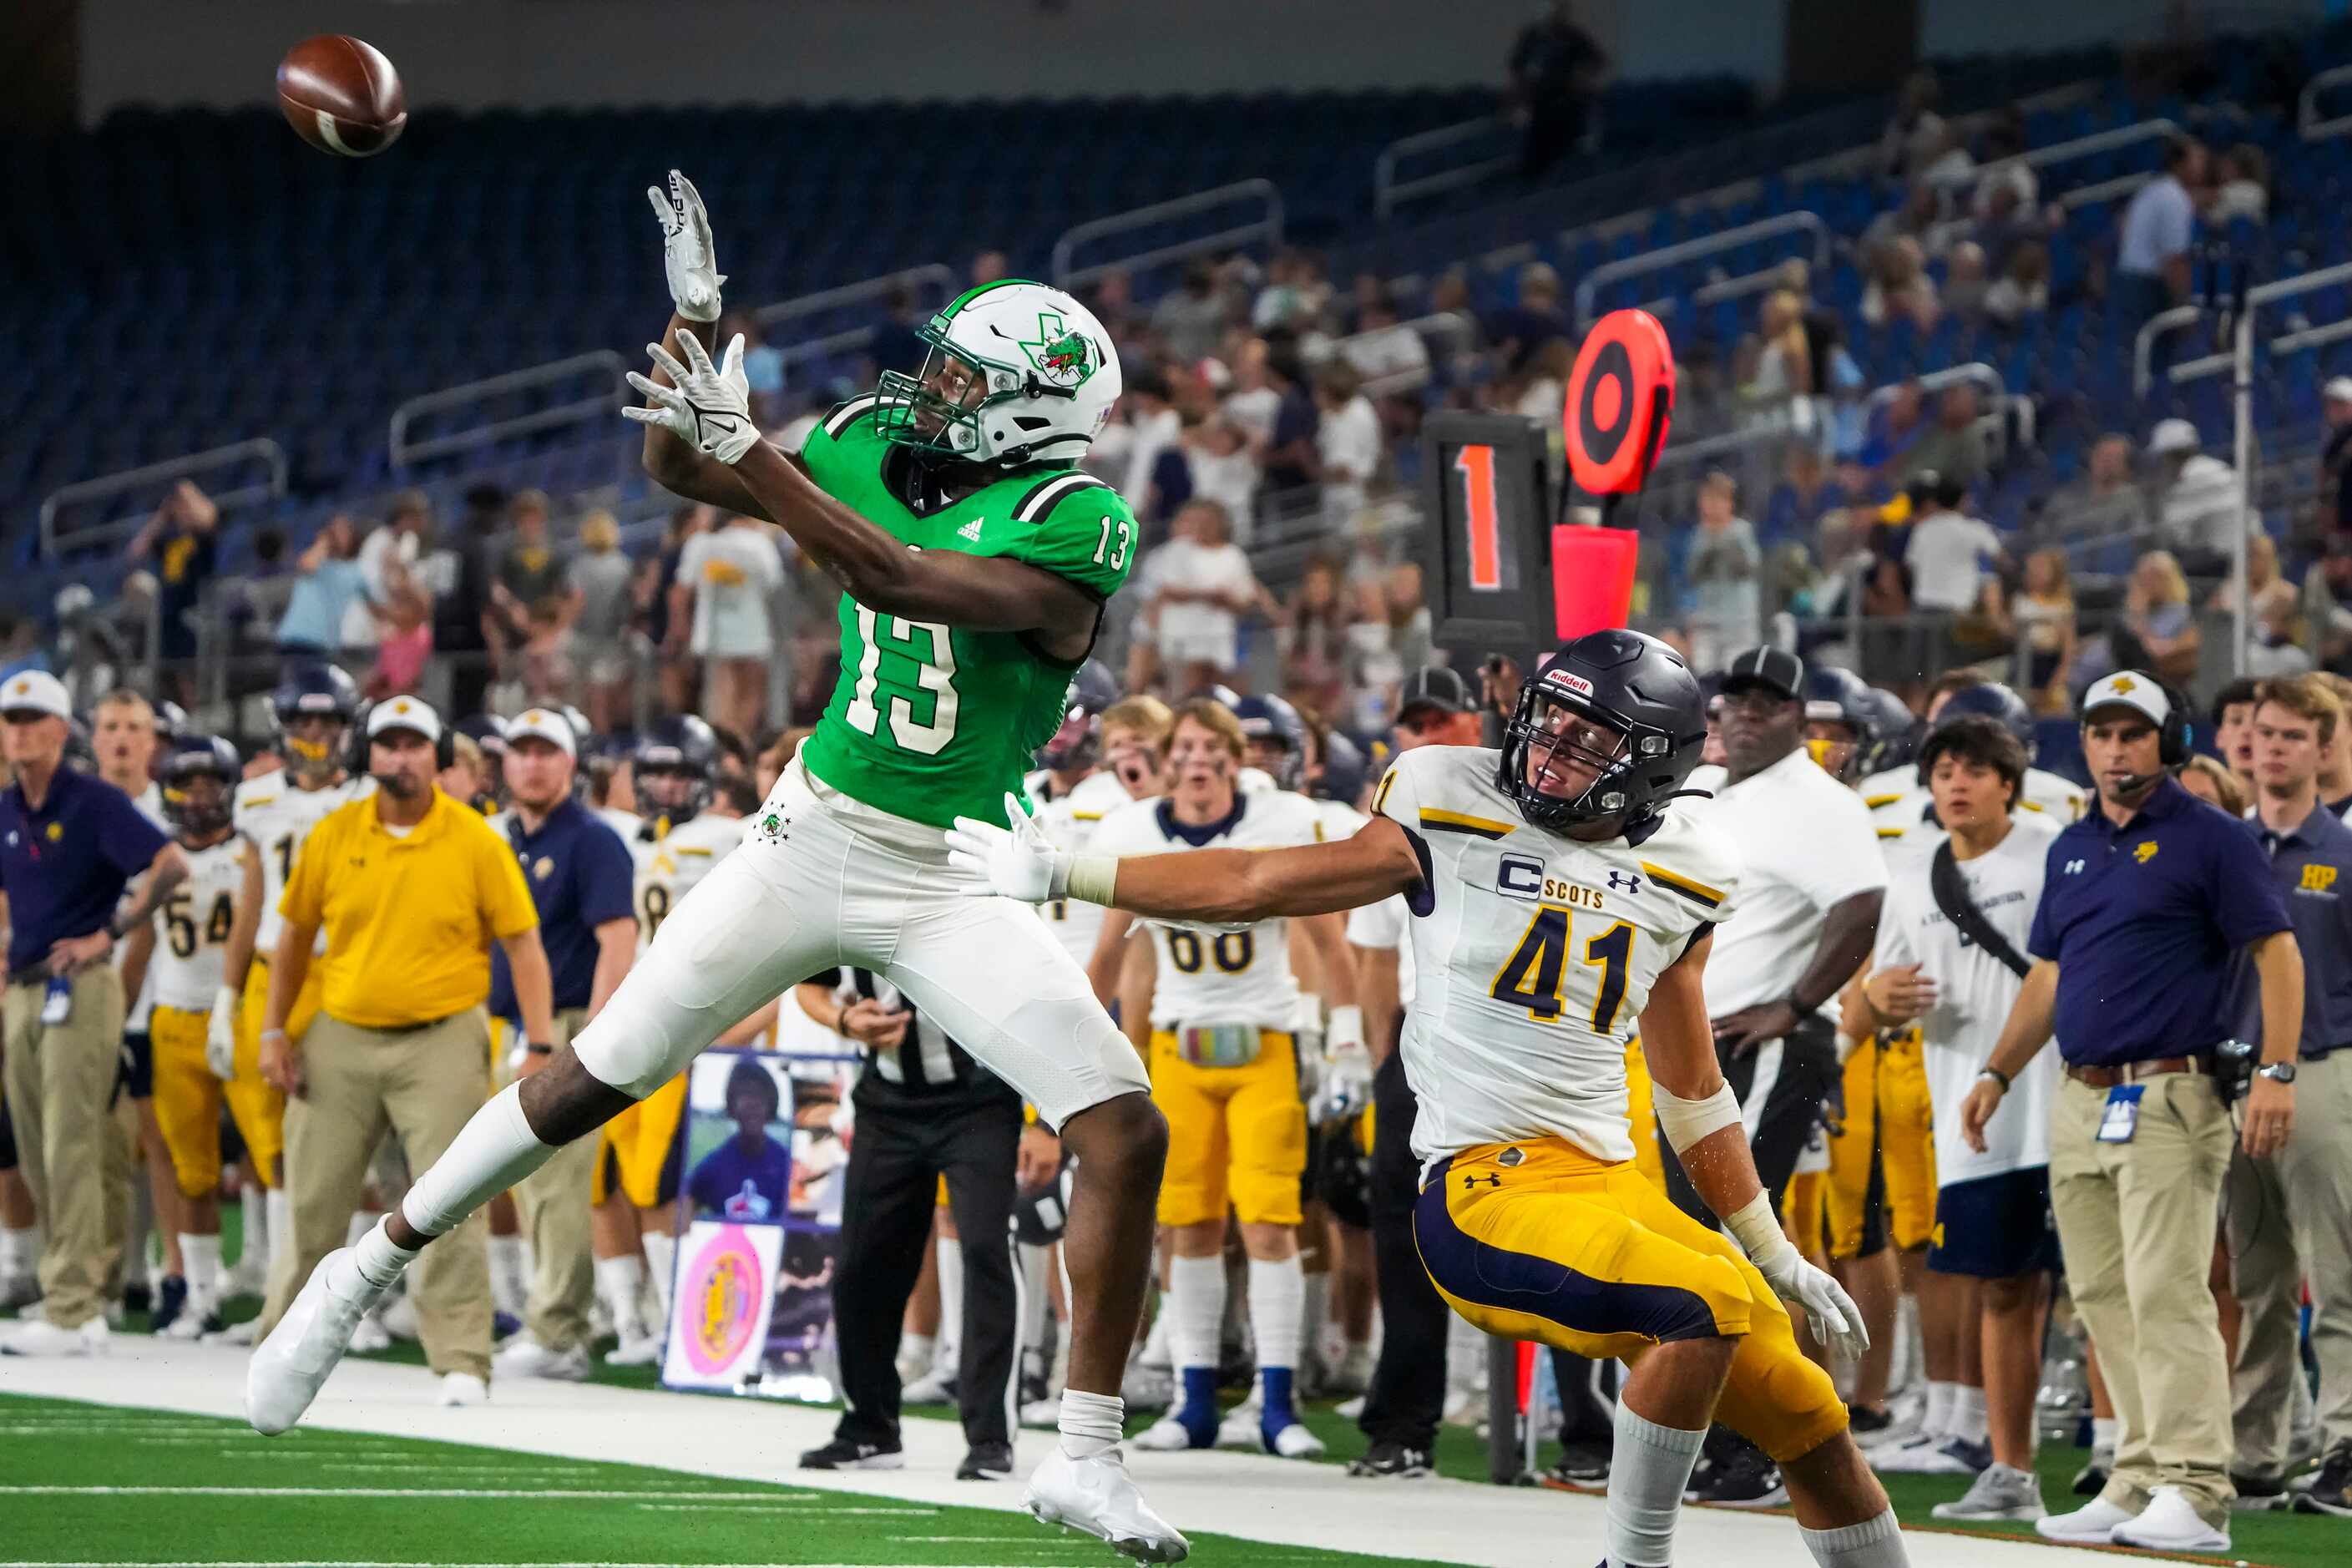 Southlake Carroll wide receiver RJ Maryland (13) reaches for a pass as Highland Park’s...